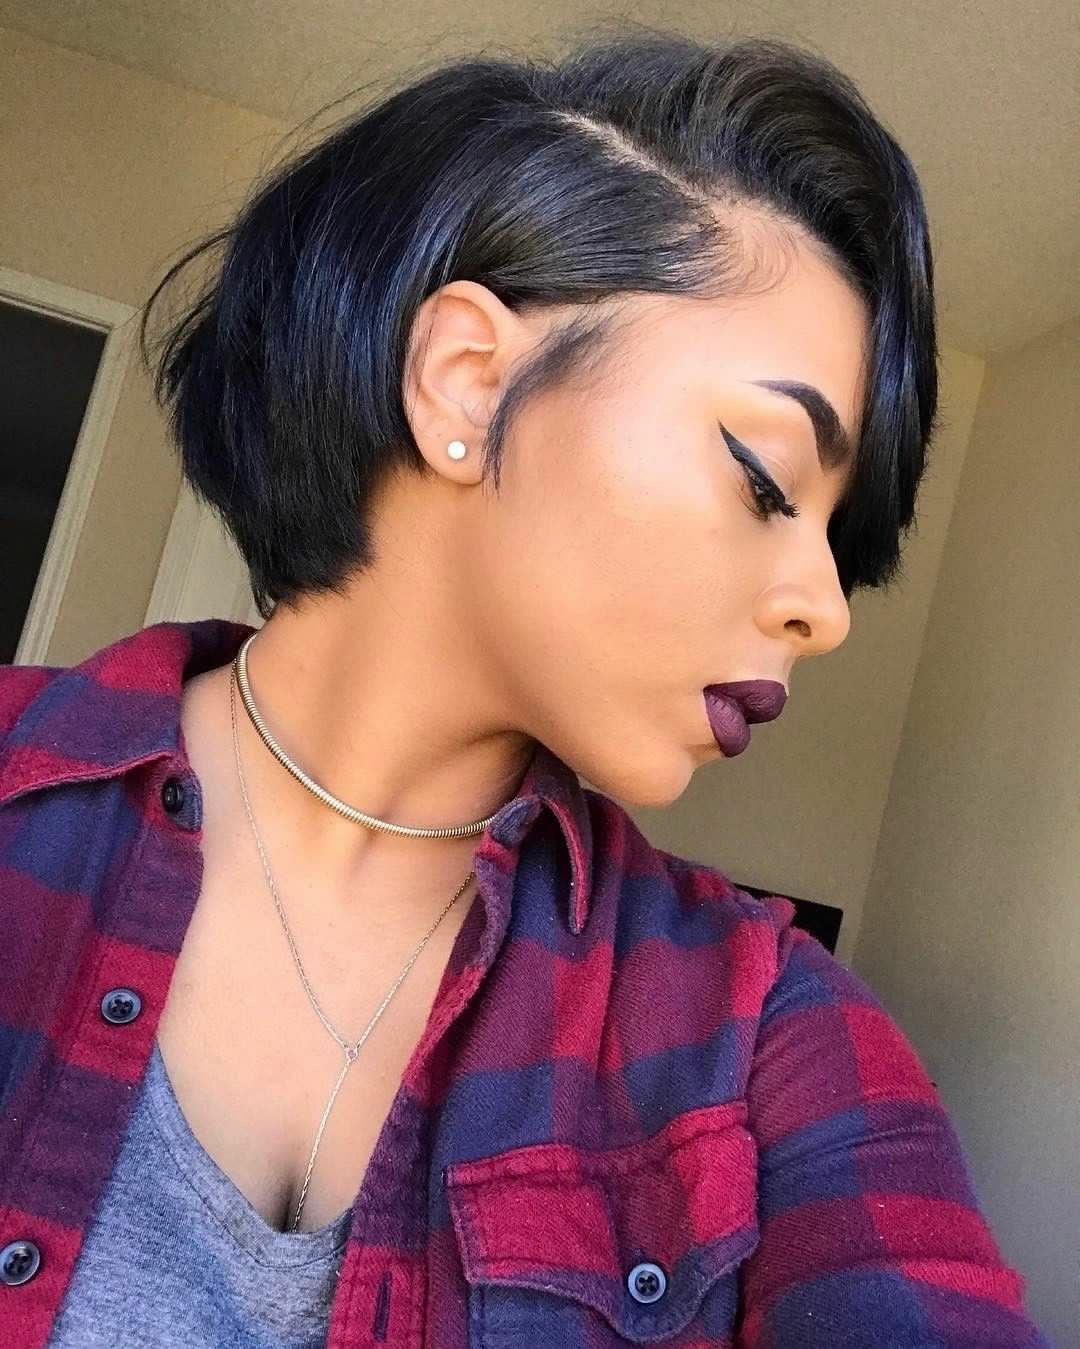 Porn girls with pixie haircuts